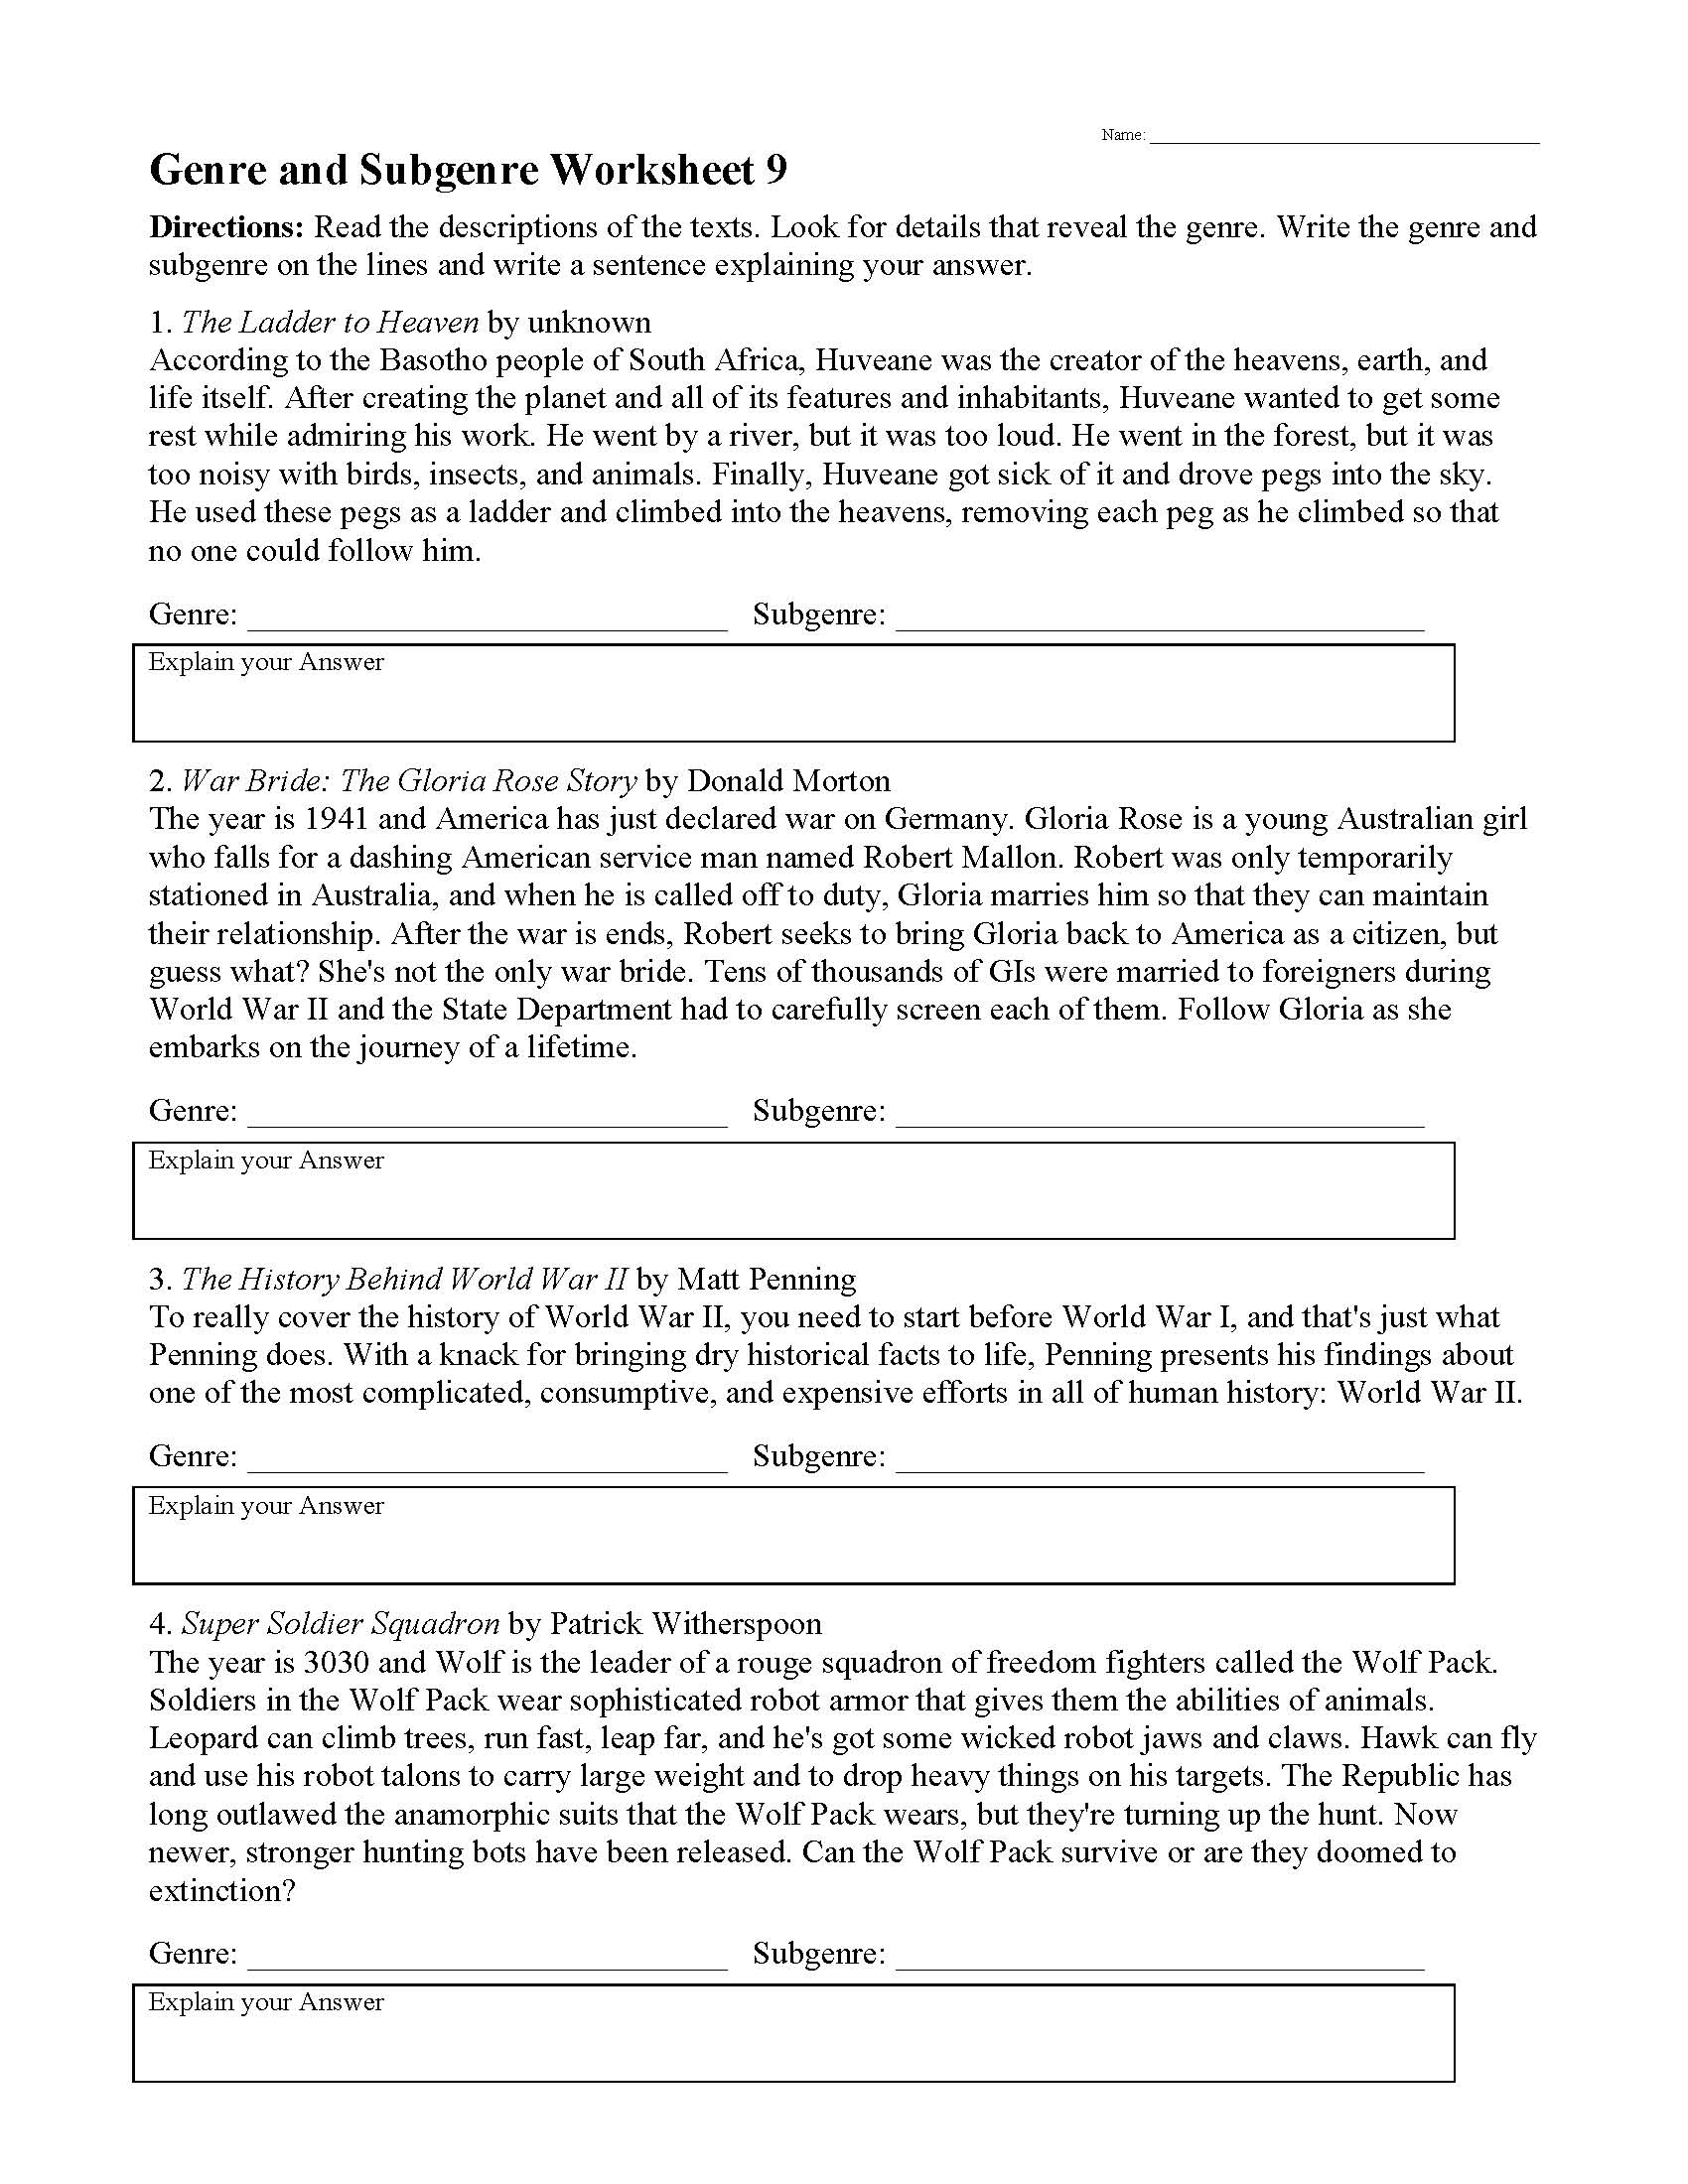 This is a preview image of Genre Worksheet 9. Click on it to enlarge it or view the source file.